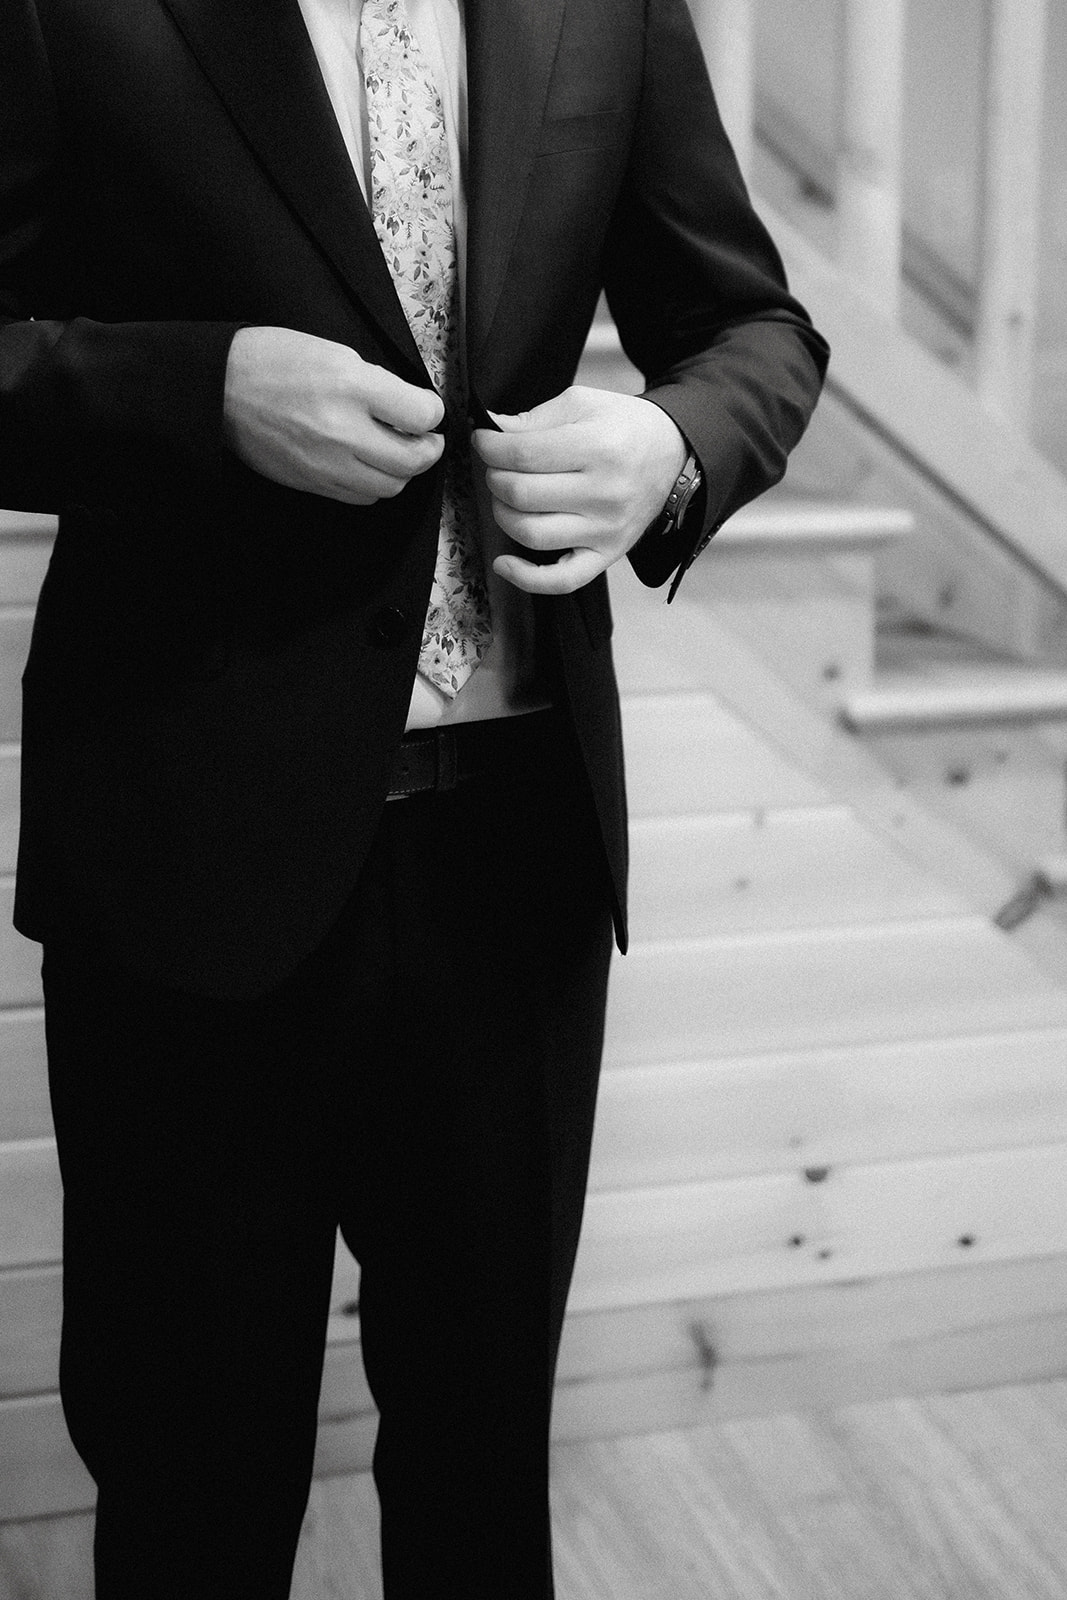 A simple candid shot of a groom finishing getting ready for his romantic and adventurous Adirondack mountain elopement